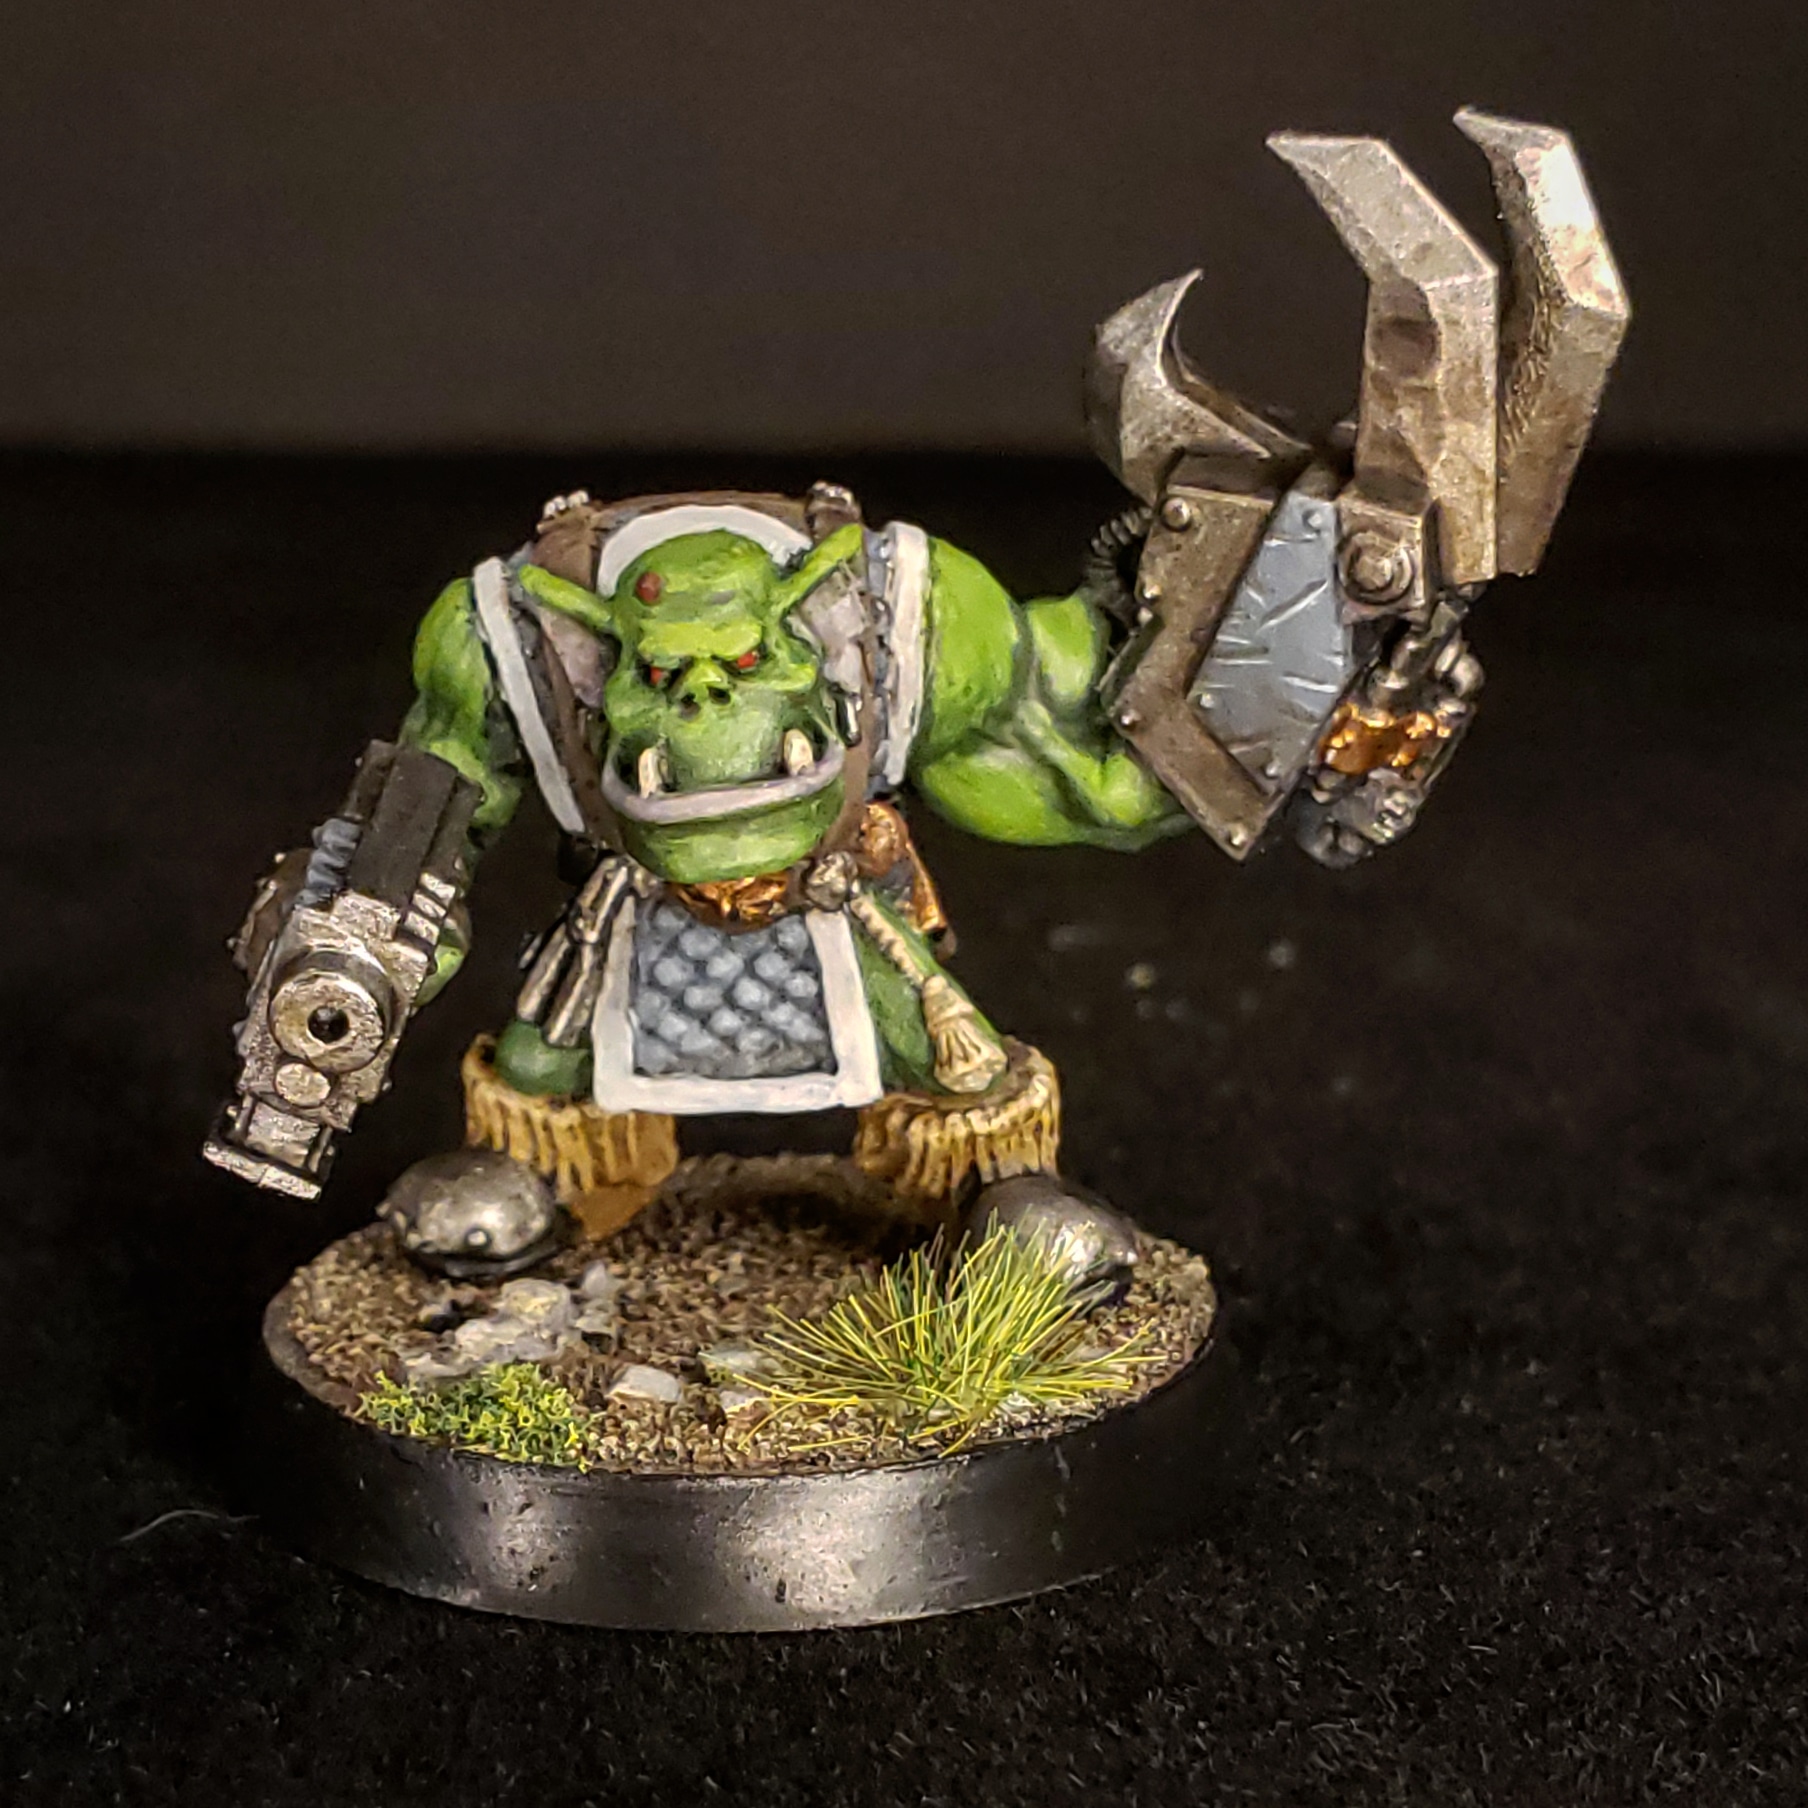 Ork nob with power claw